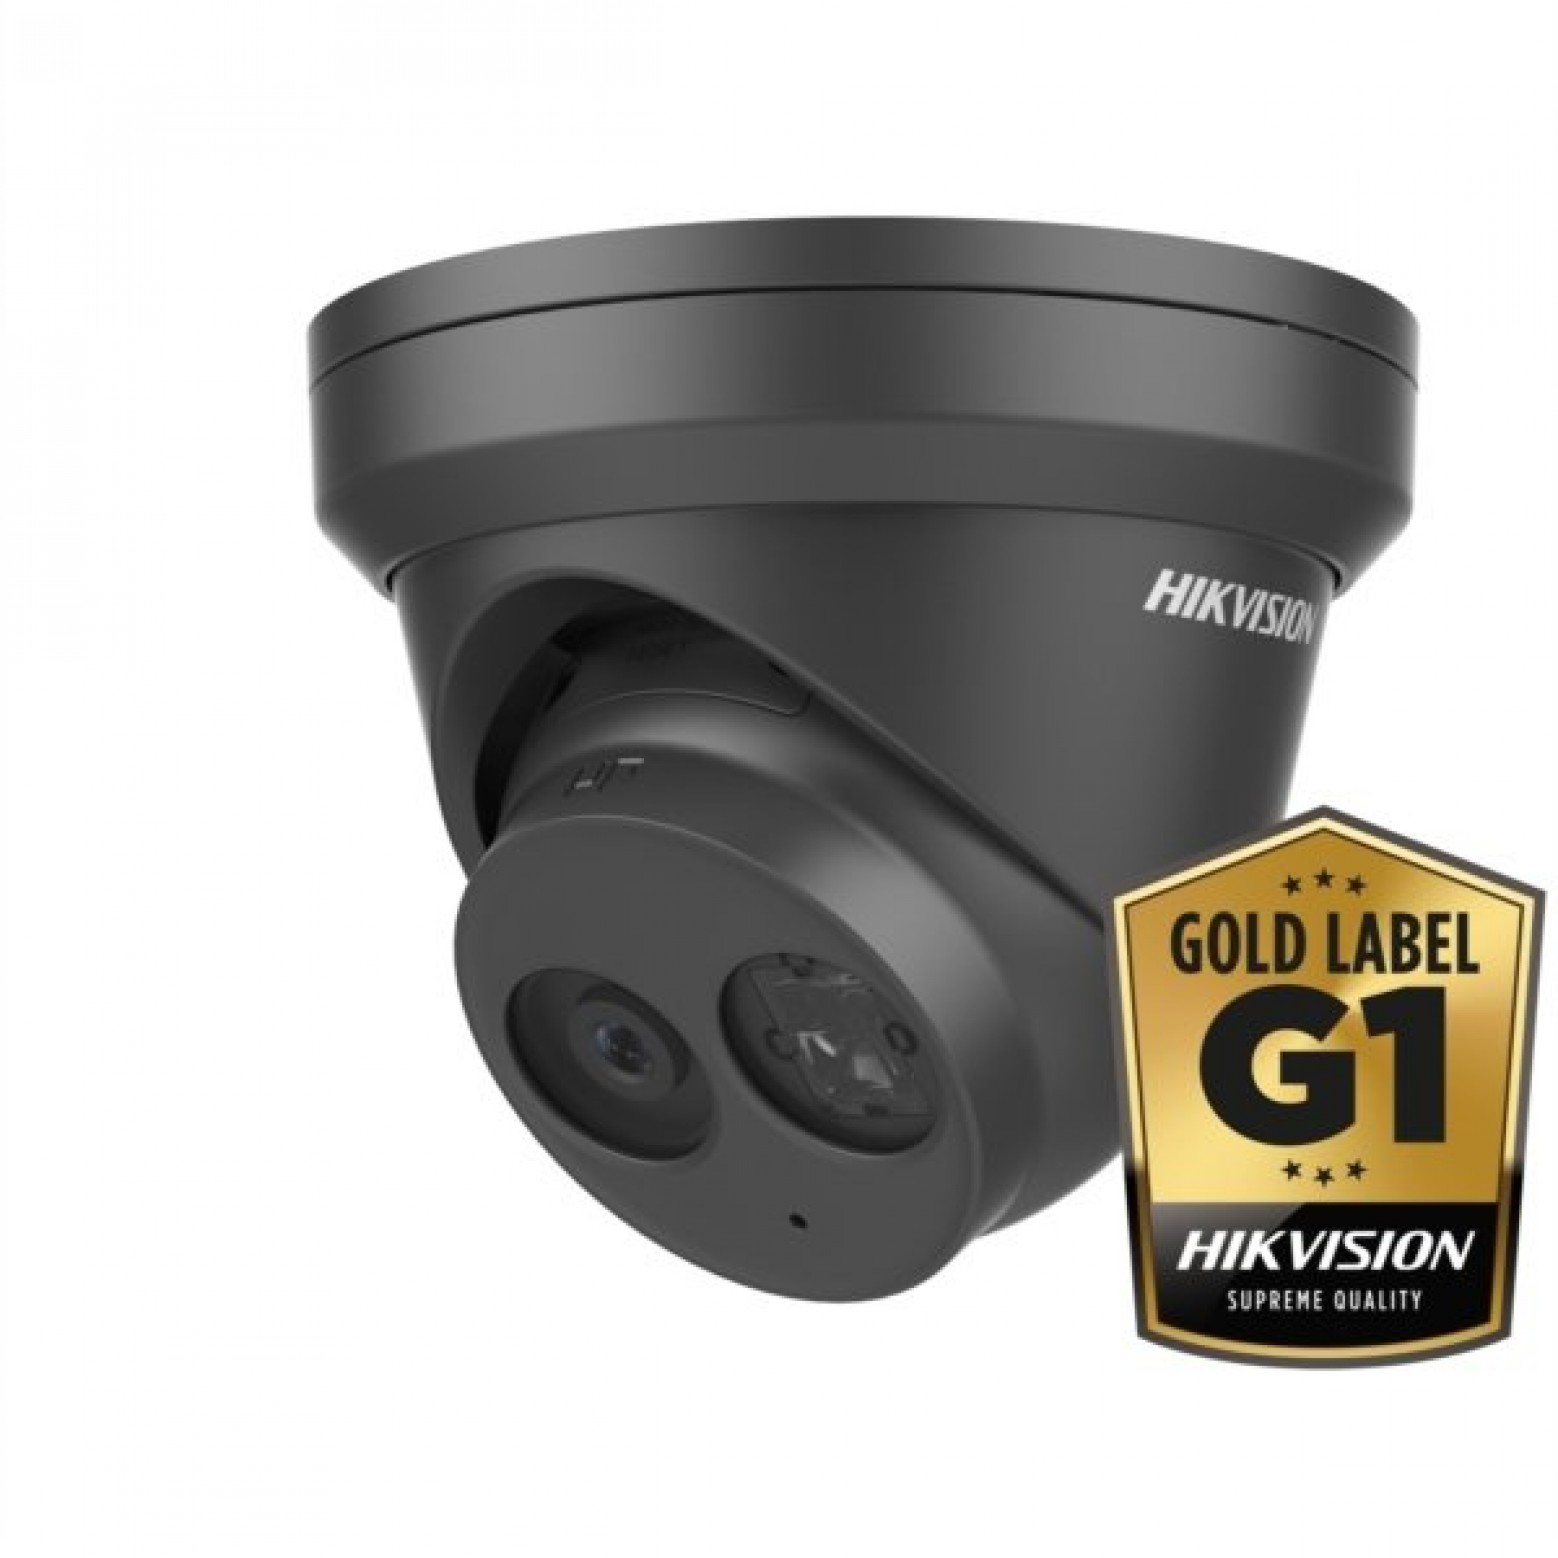 Hikvision DS-2CD2335FWD-IB, Exir Dome Camera, Black Edition, 3MP, 30m IR, WDR, Ultra Low Light